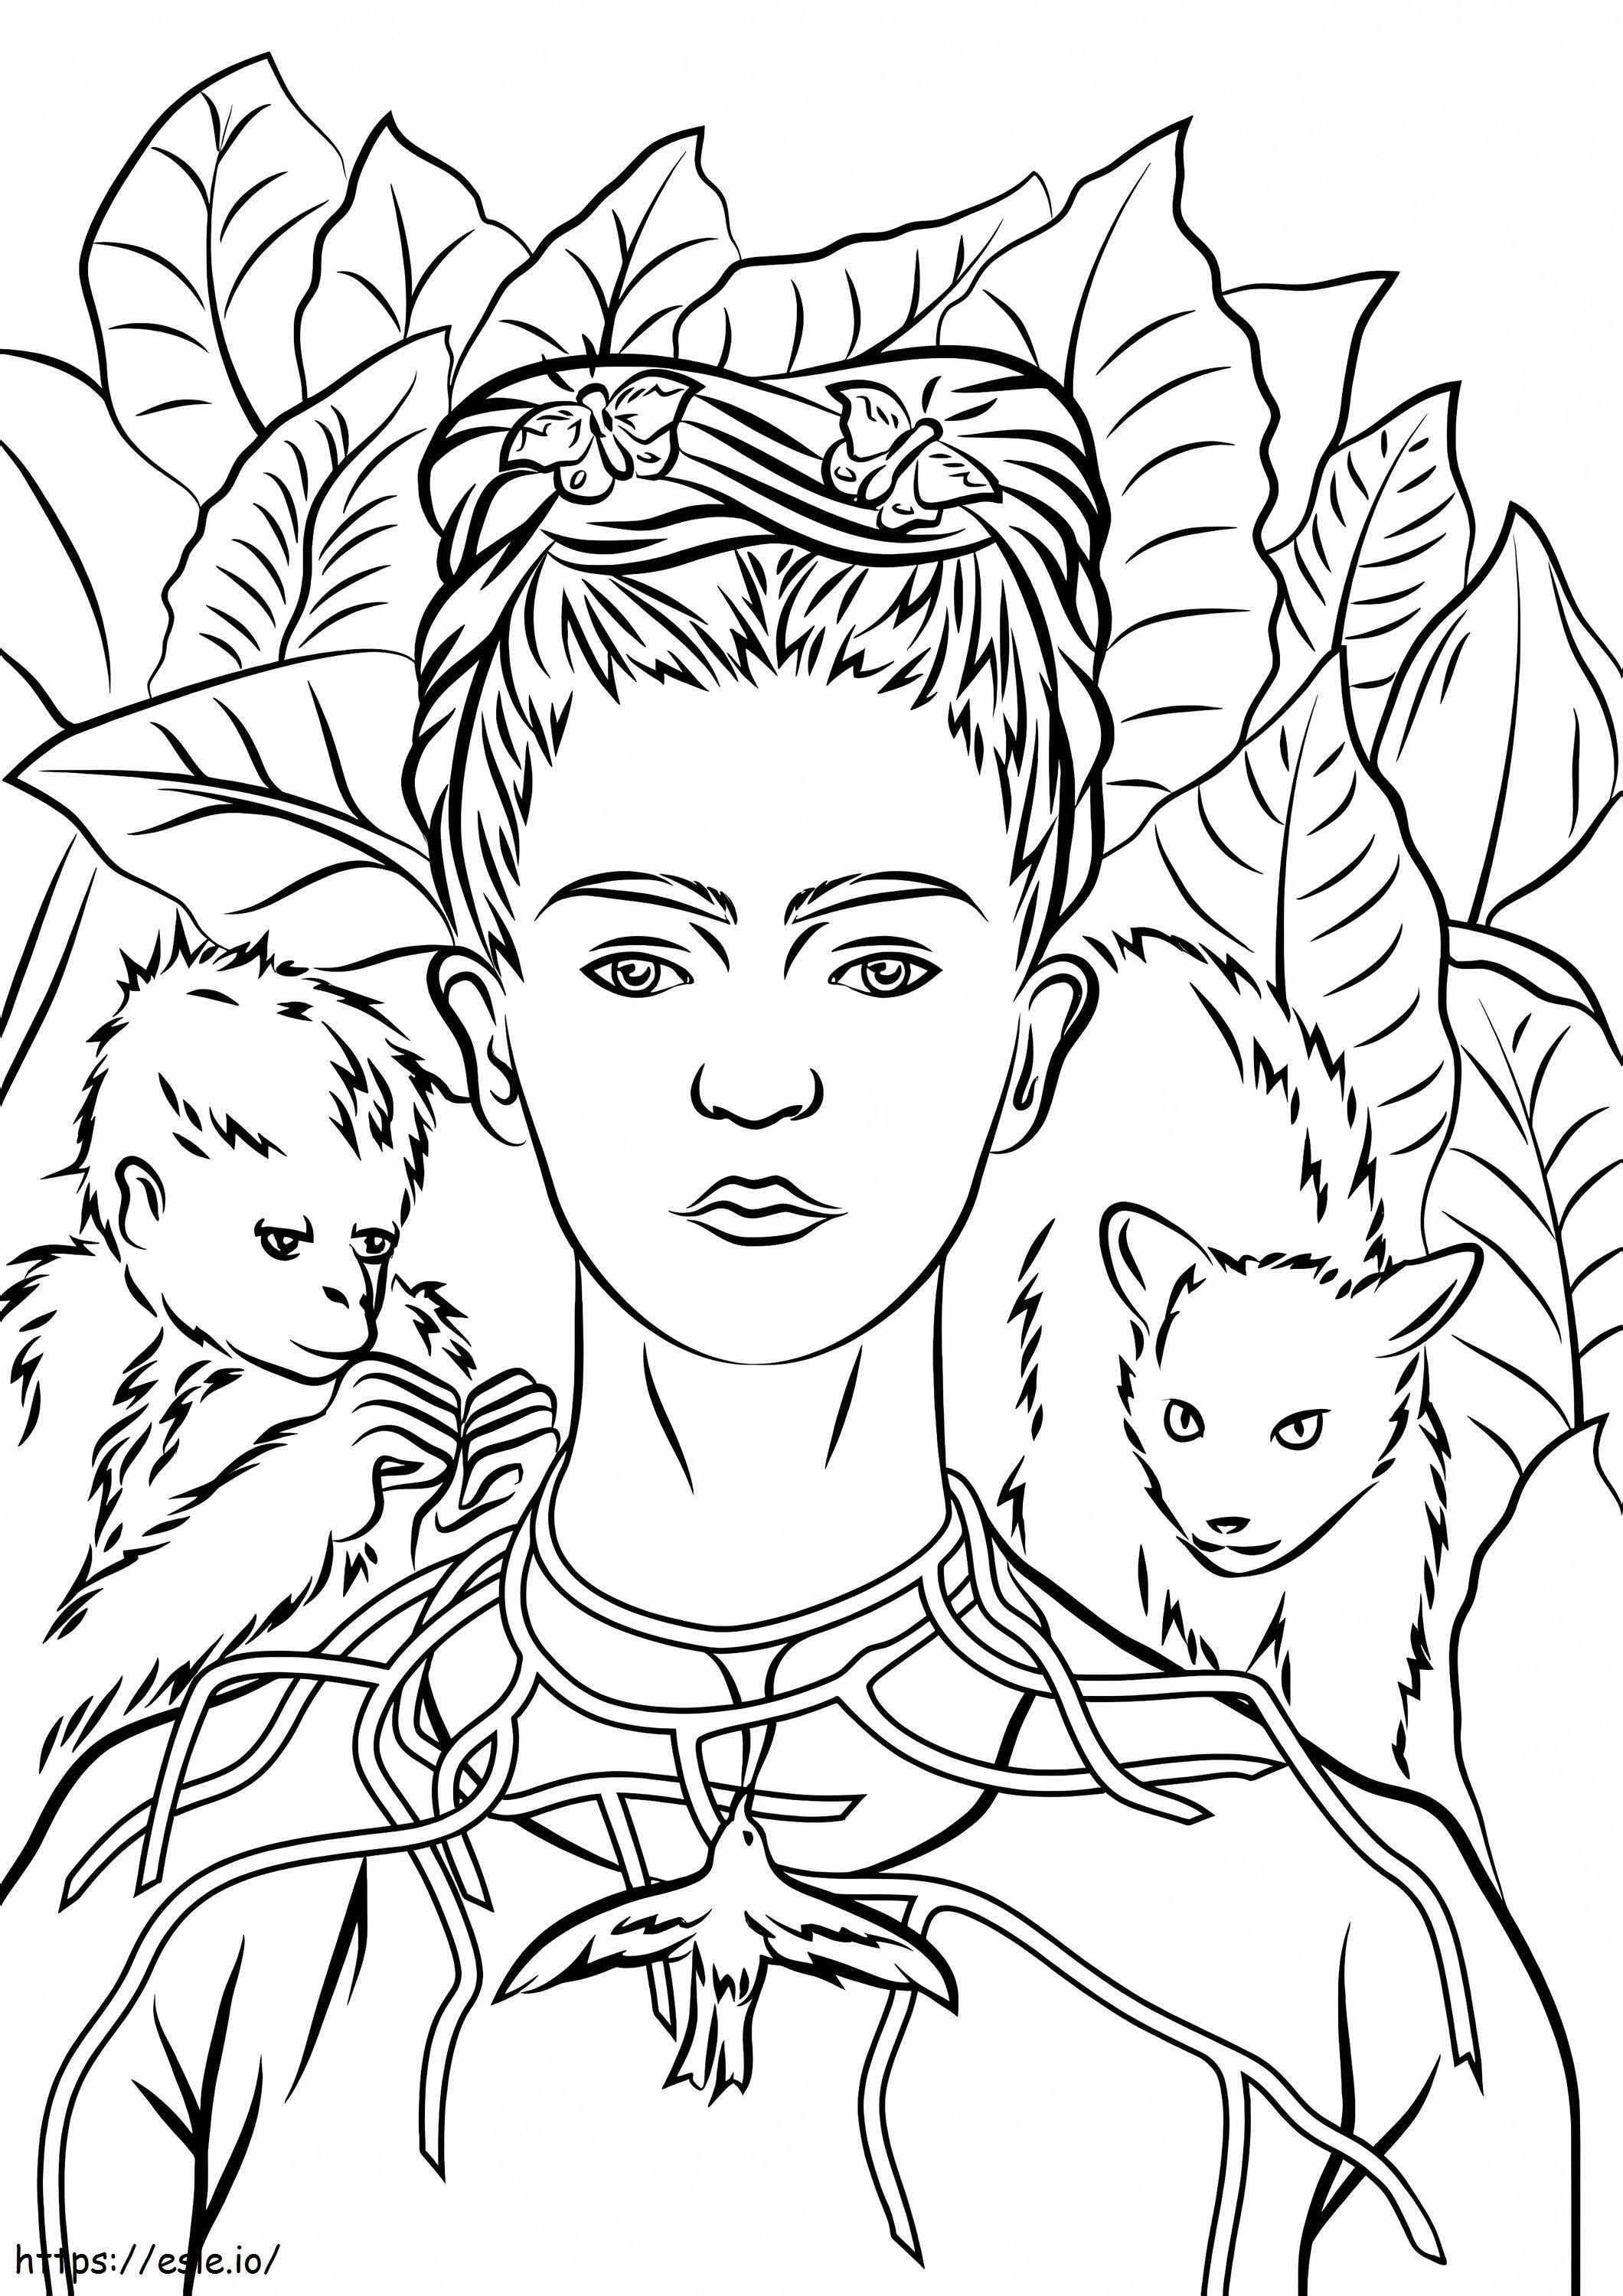 Self Portrait By Frida Kahlo coloring page